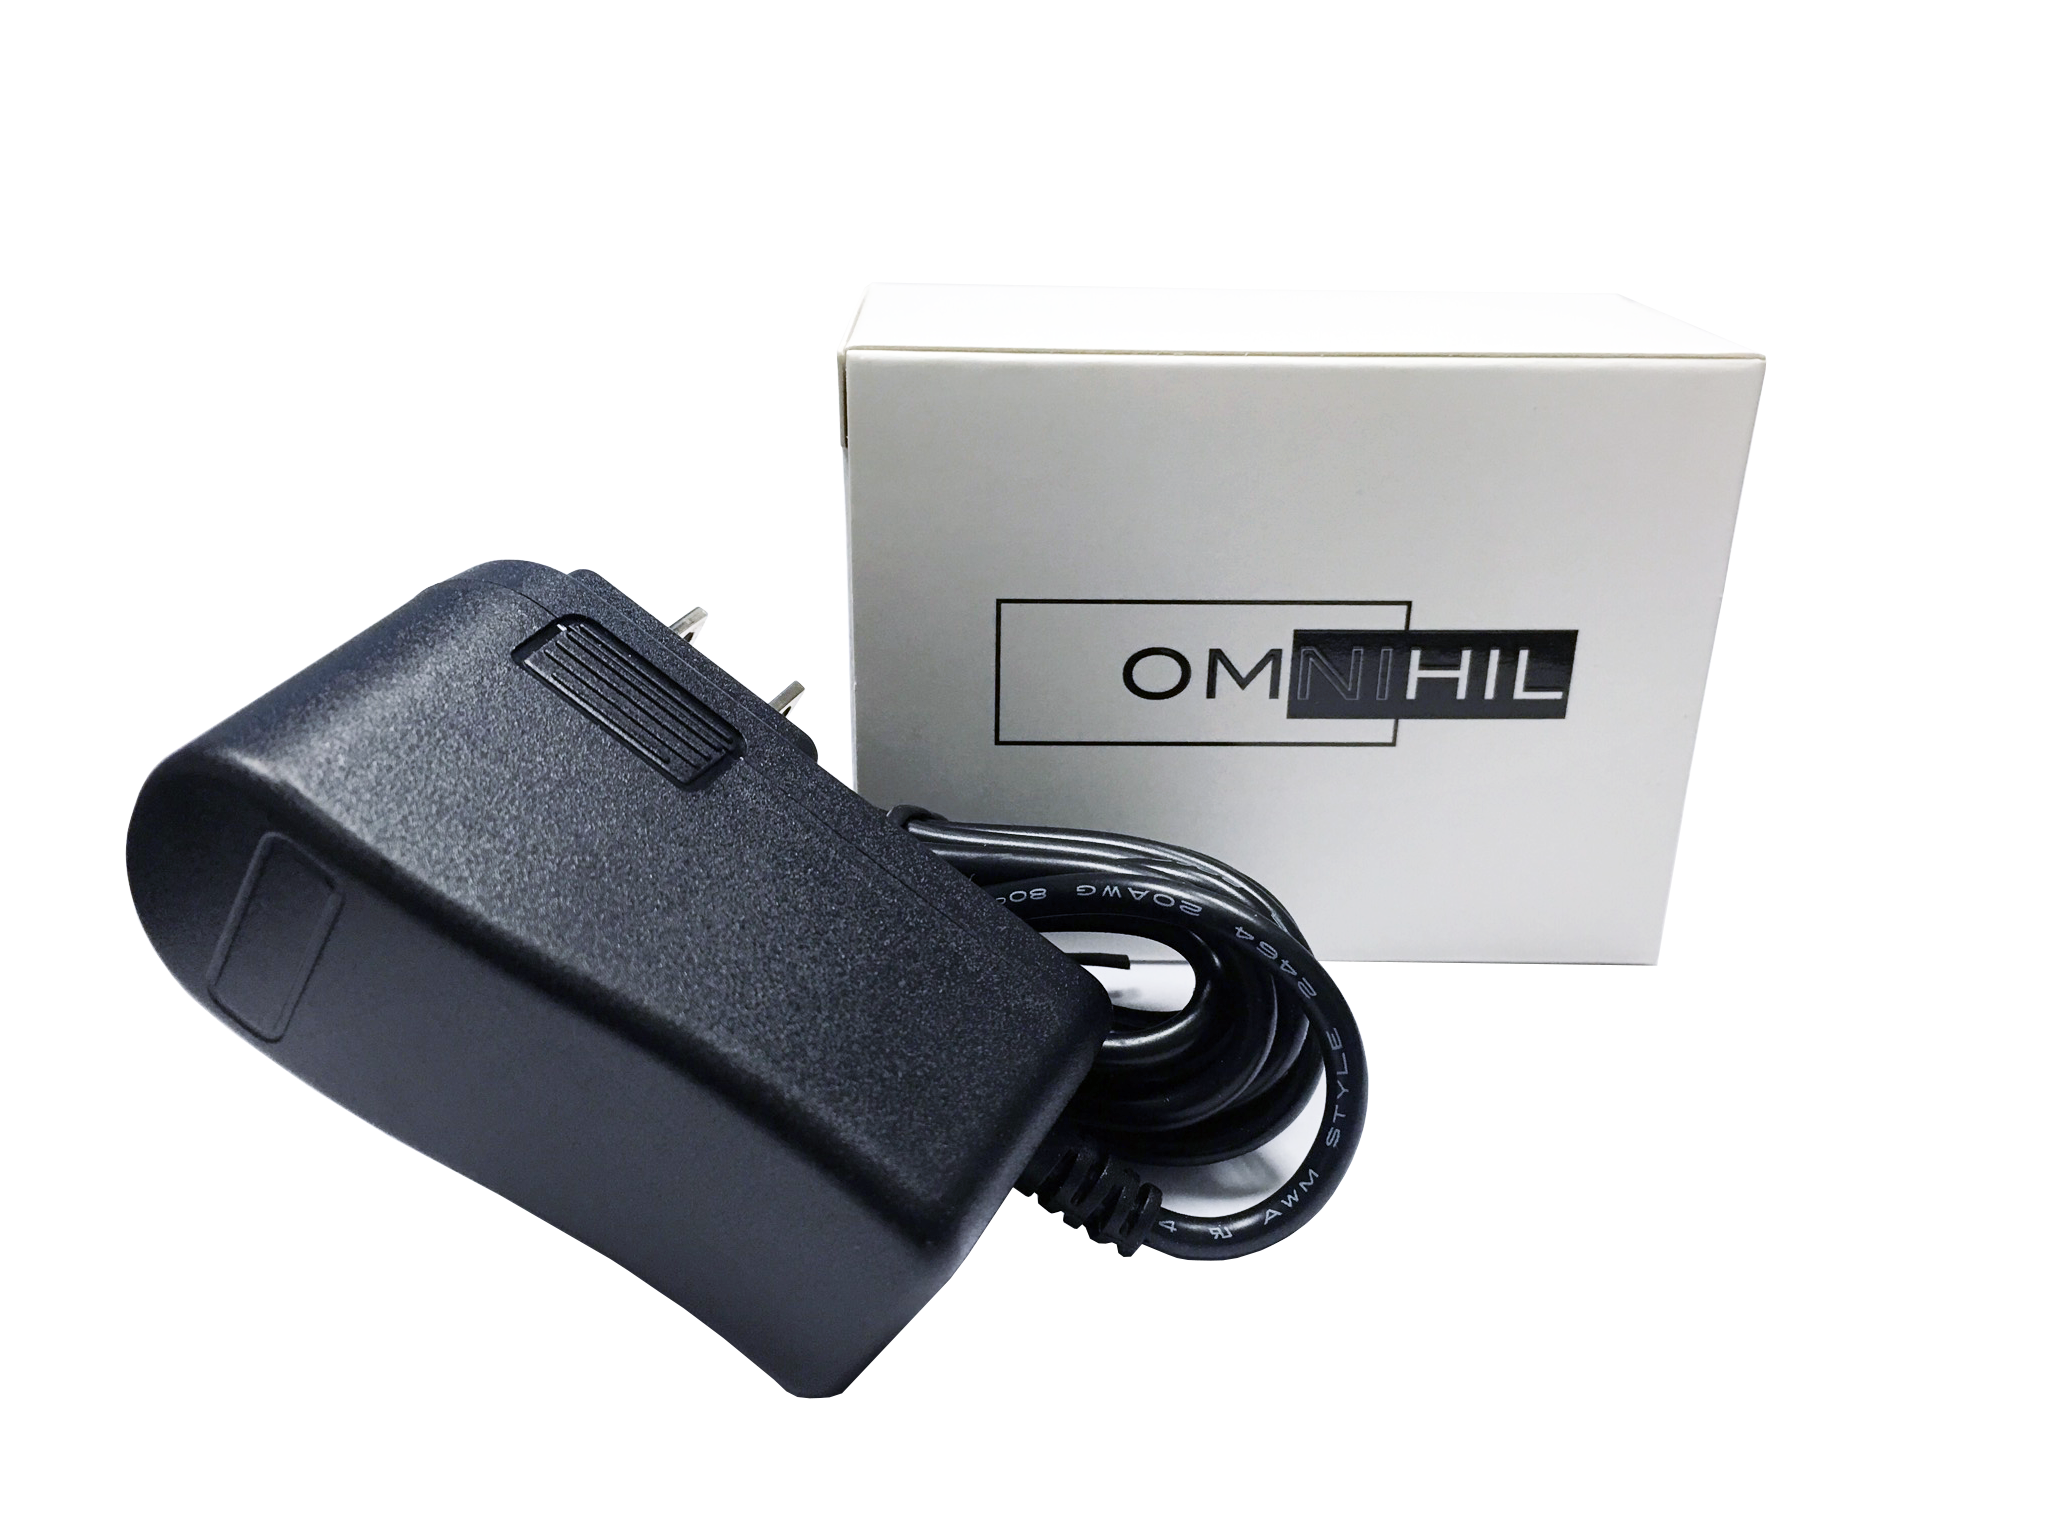 OMNIHIL AC/DC Power Adapter/Adaptor for DC 9V OMNIHIL AC/DC/DC OMNIHIL AC/DC Power Adapter/Adaptor Power for BOSS PSA-120 Replacement Switching Power Supply Cord Cable PS Wall Home Charger Mains PSU - image 1 of 4